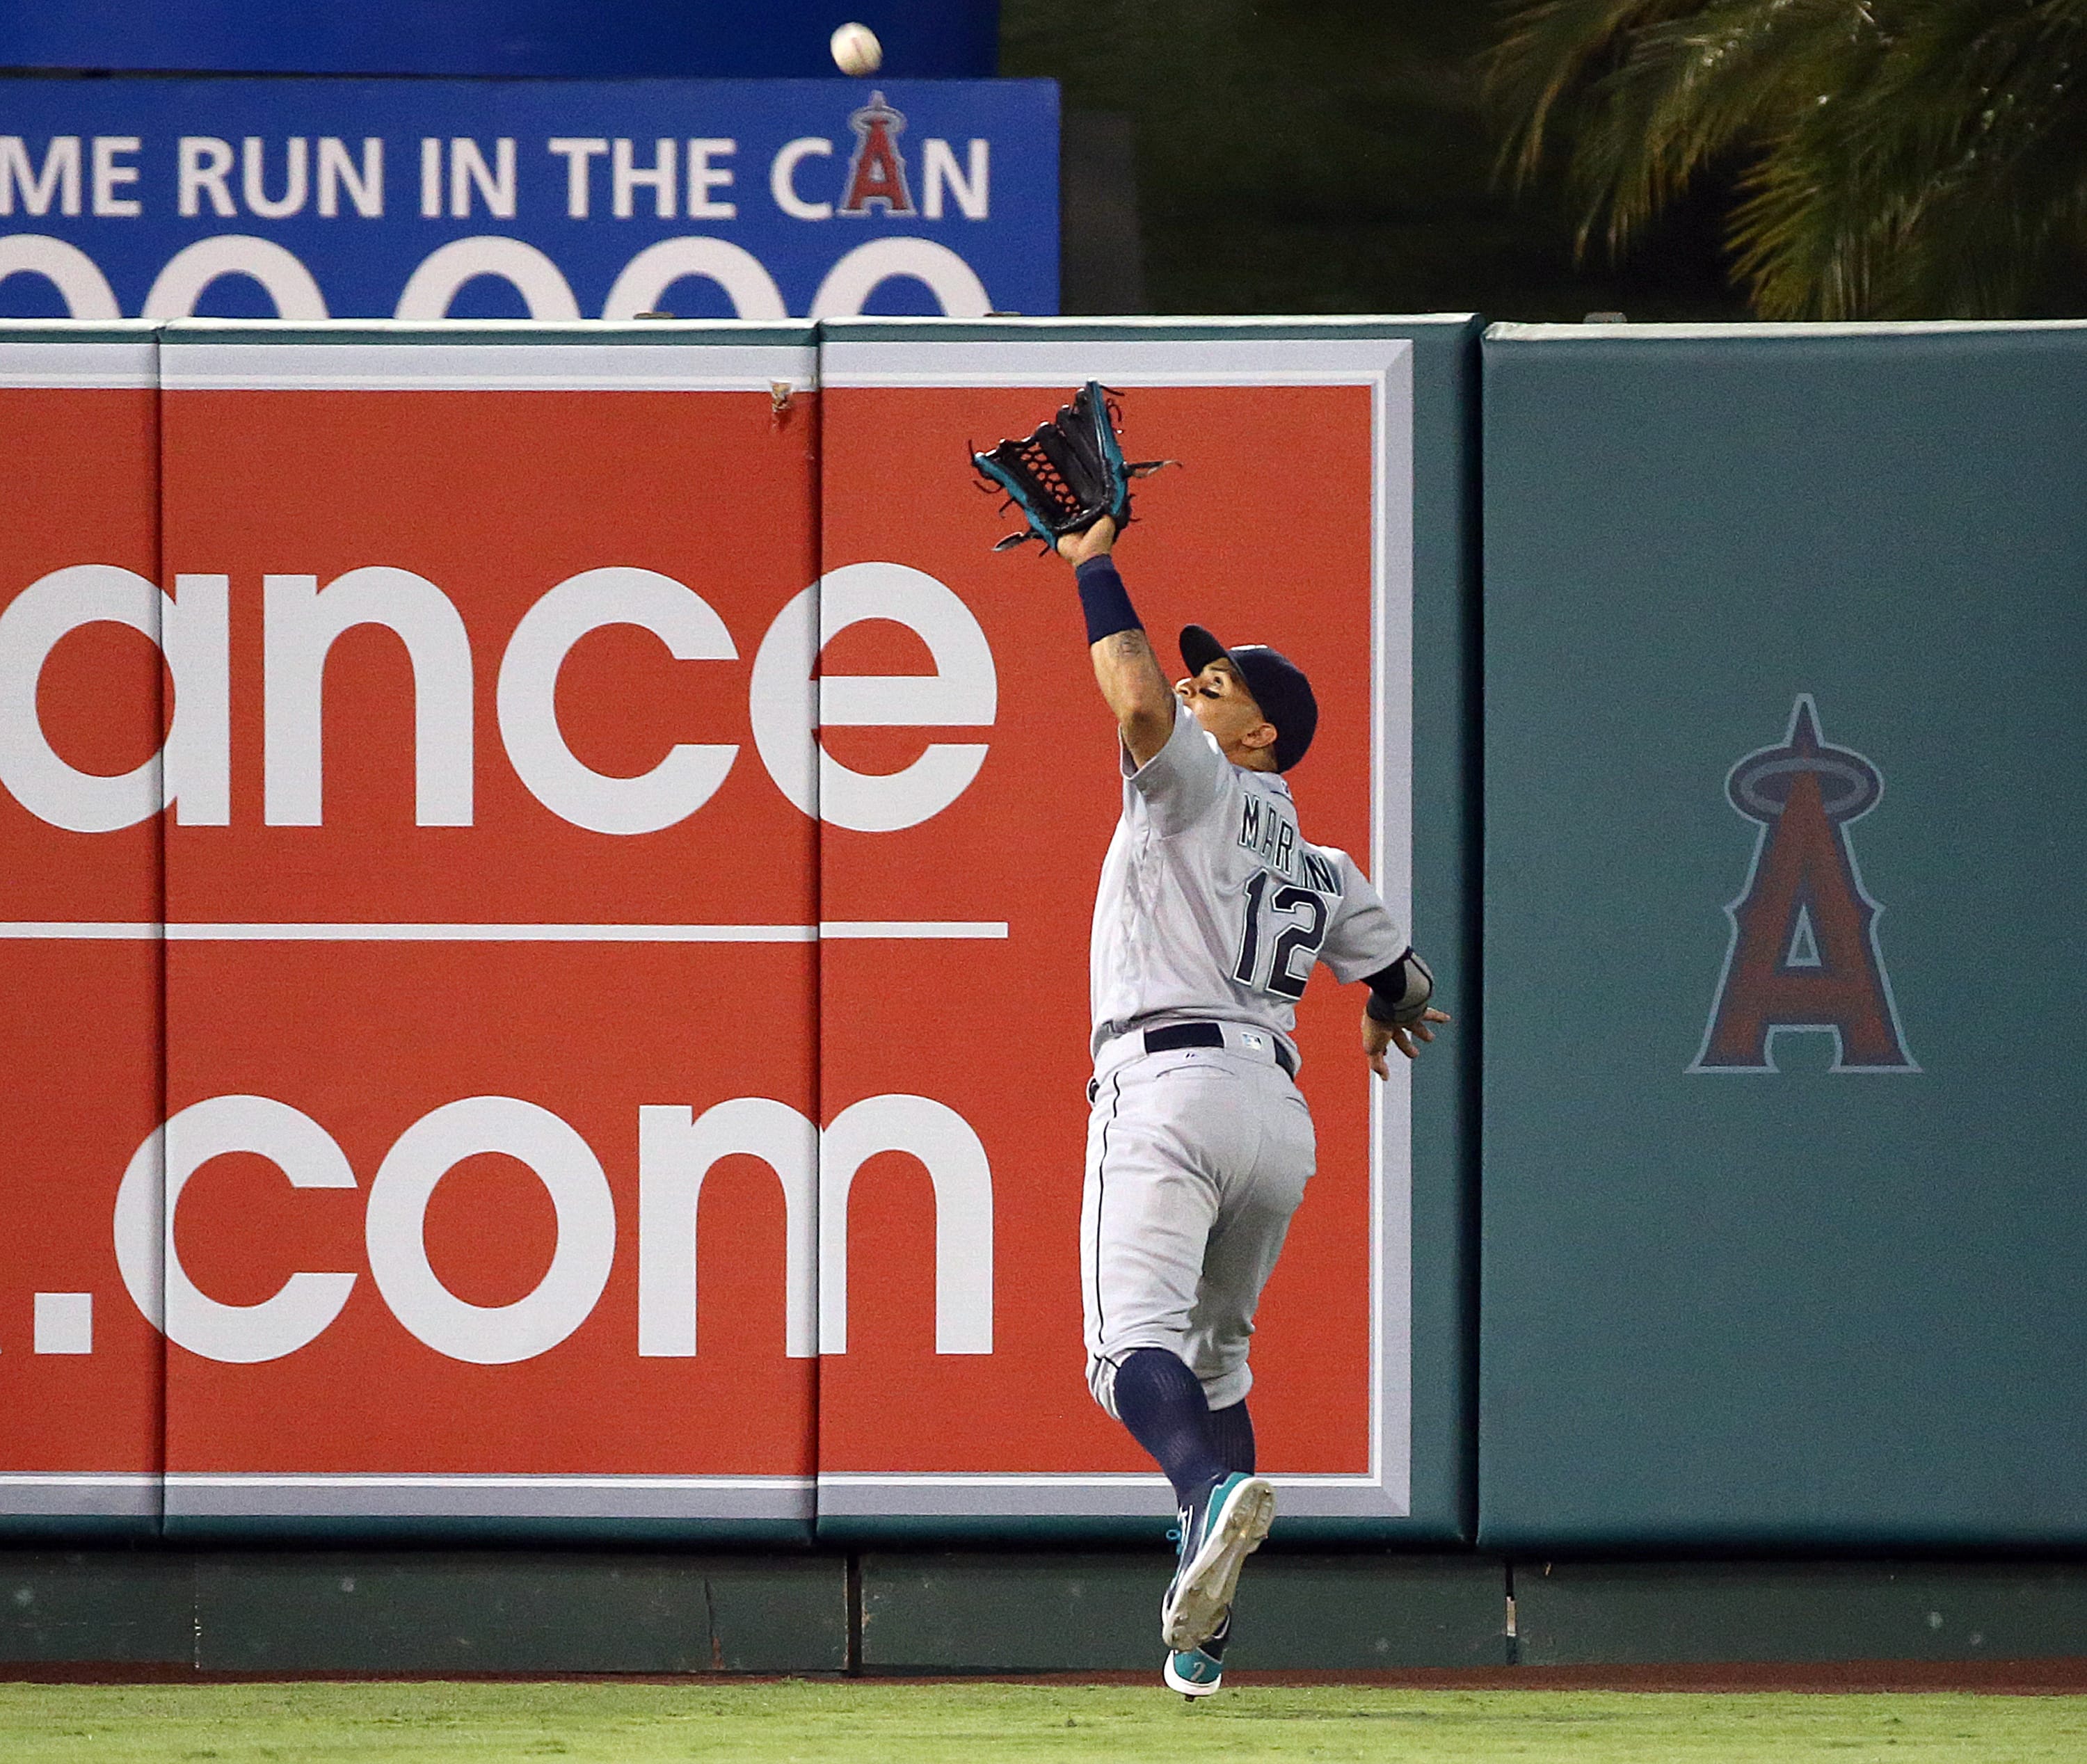 Seattle Mariners center fielder Leonys Martin reaches back to catch a fly ball by Los Angeles Angels' Ji-Man Choi during the second inning of a baseball game in Anaheim, Calif., Thursday, Aug. 18, 2016.